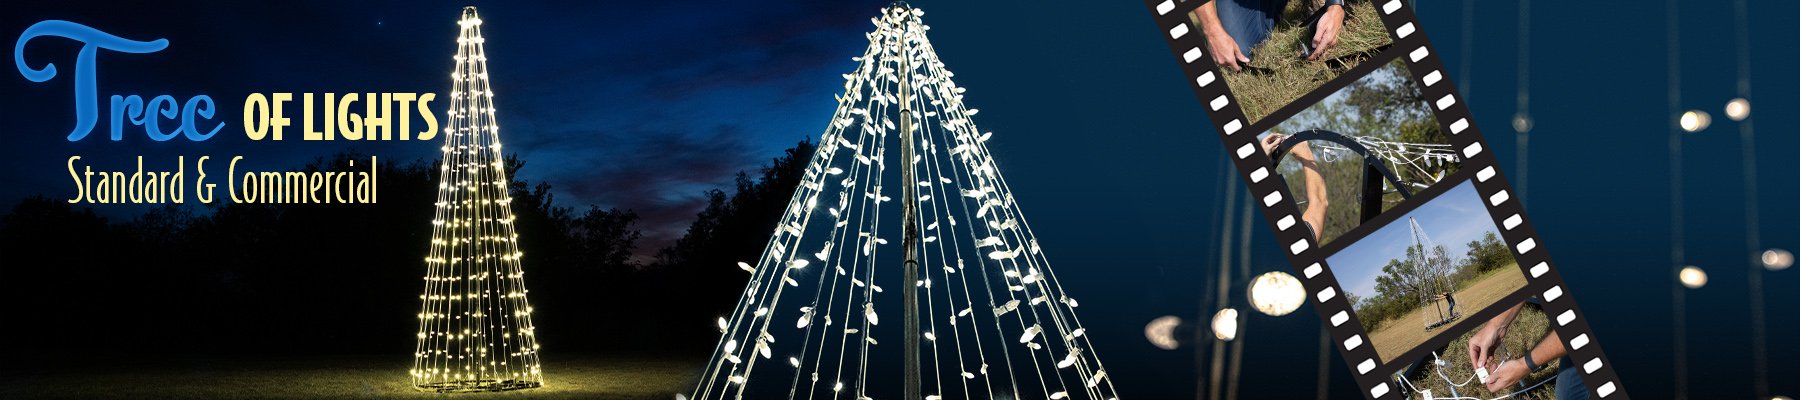 Tree of Lights - Commercial and Standard